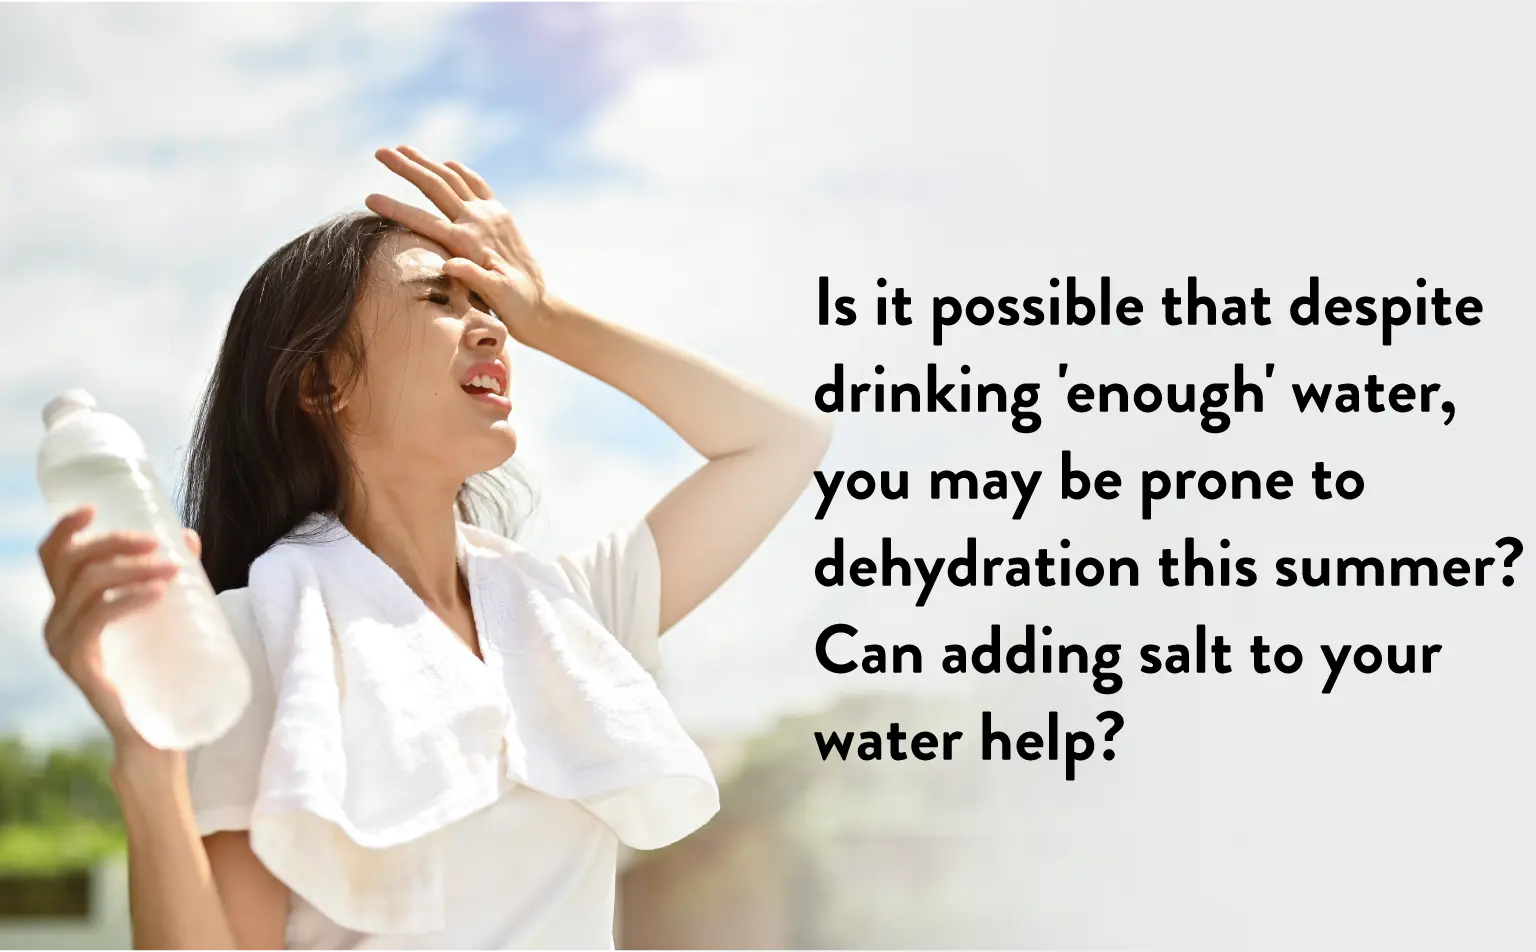 Drinking water and dehydration